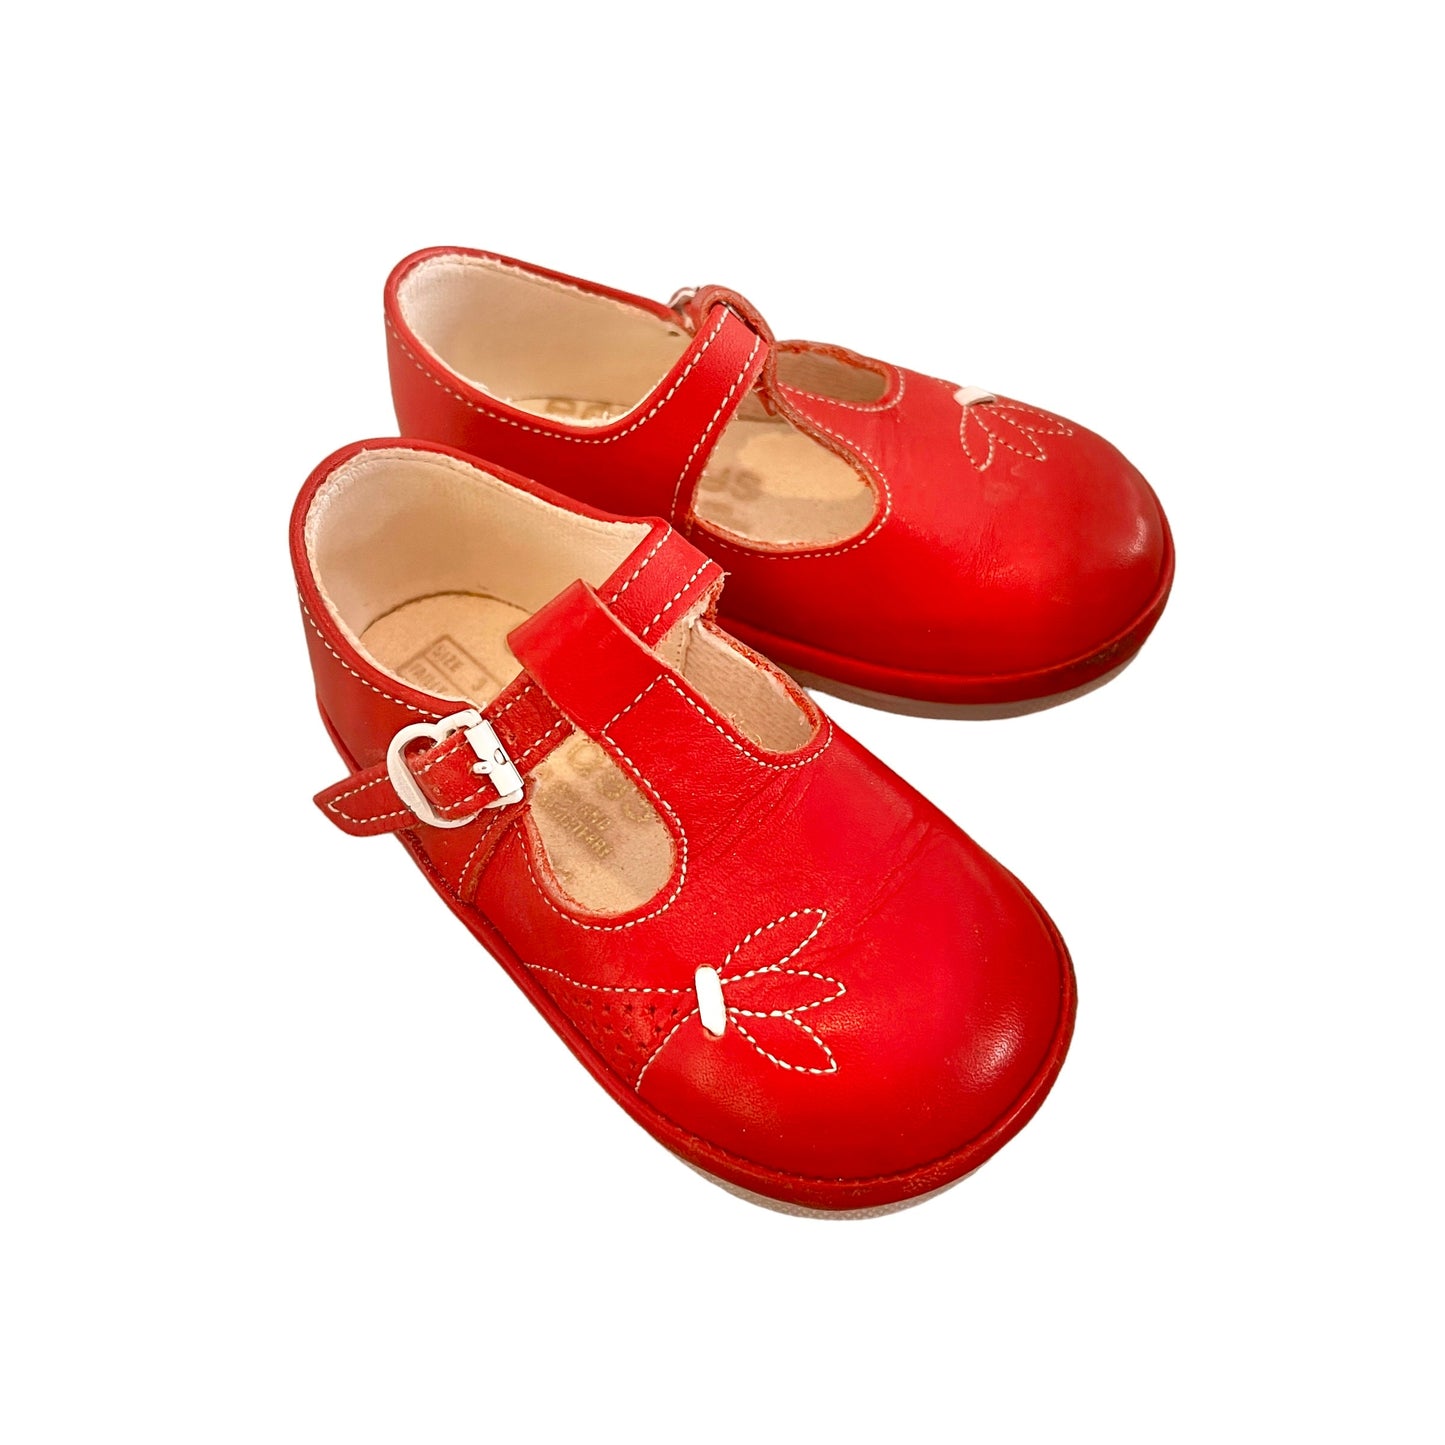 Vintage Red  Mary Janes Baby Shoes Size EU 19